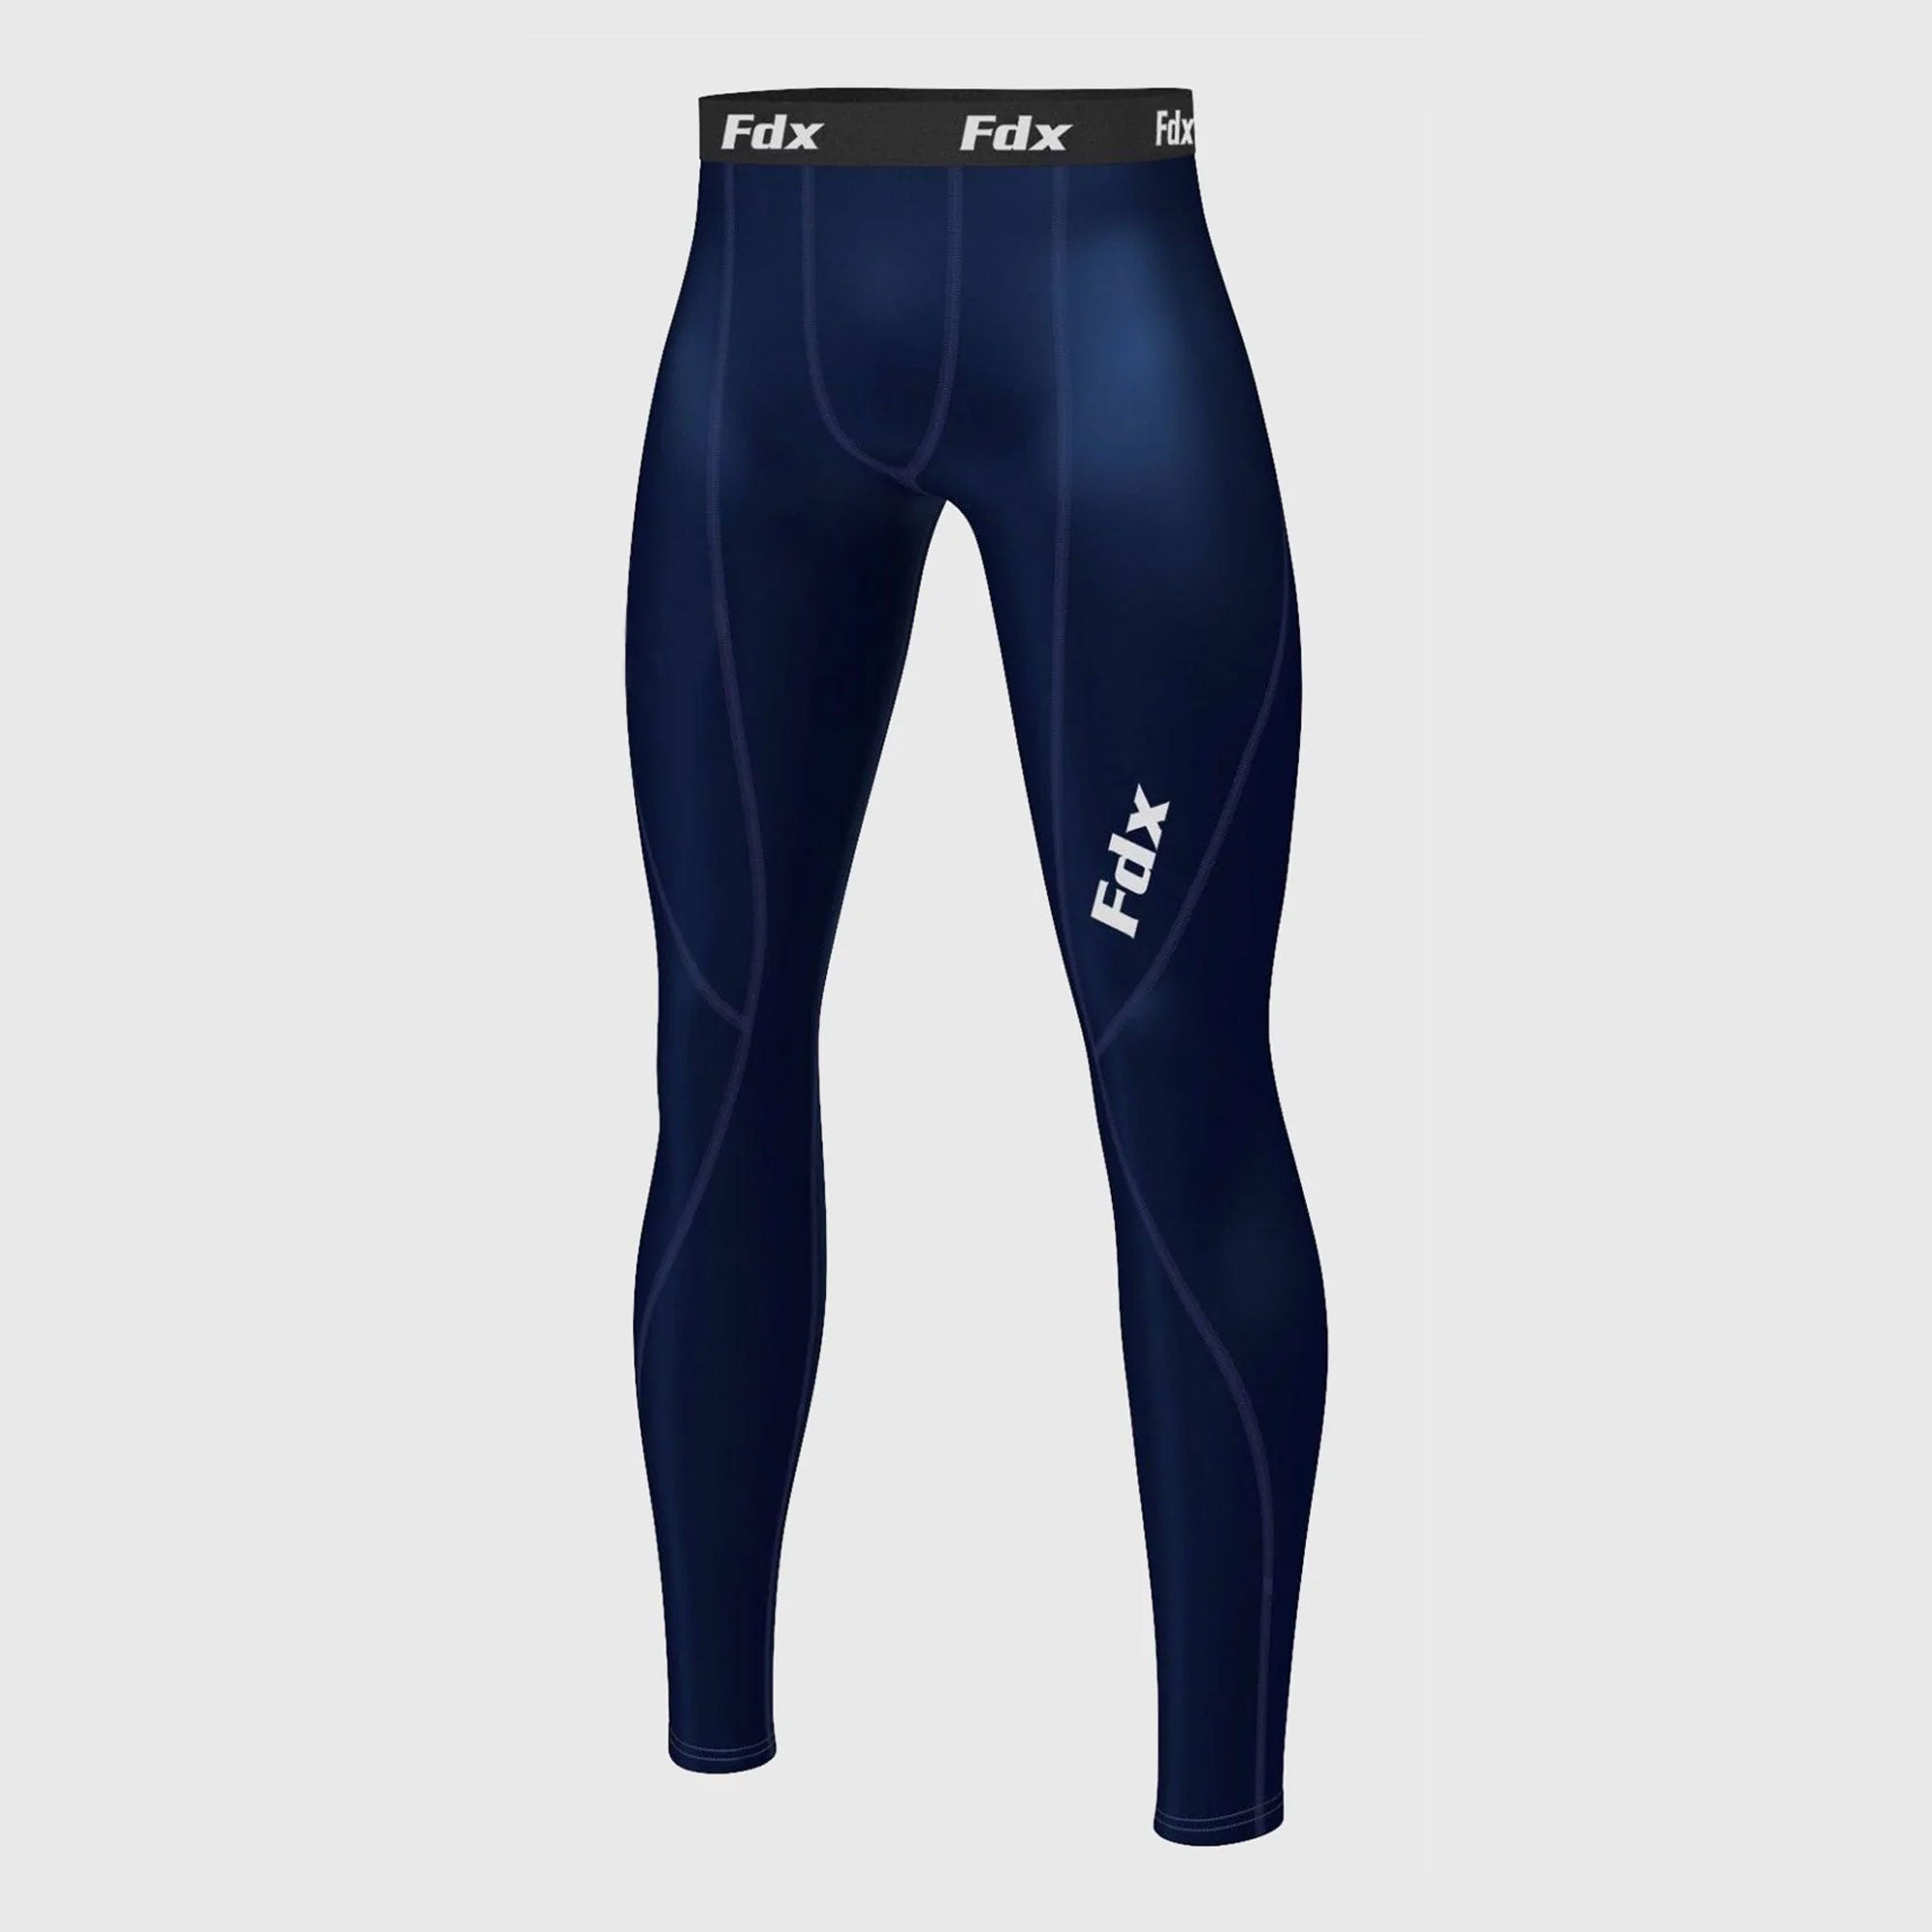 Fdx Thermolinx Navy Blue Men's Winter Compression Tights